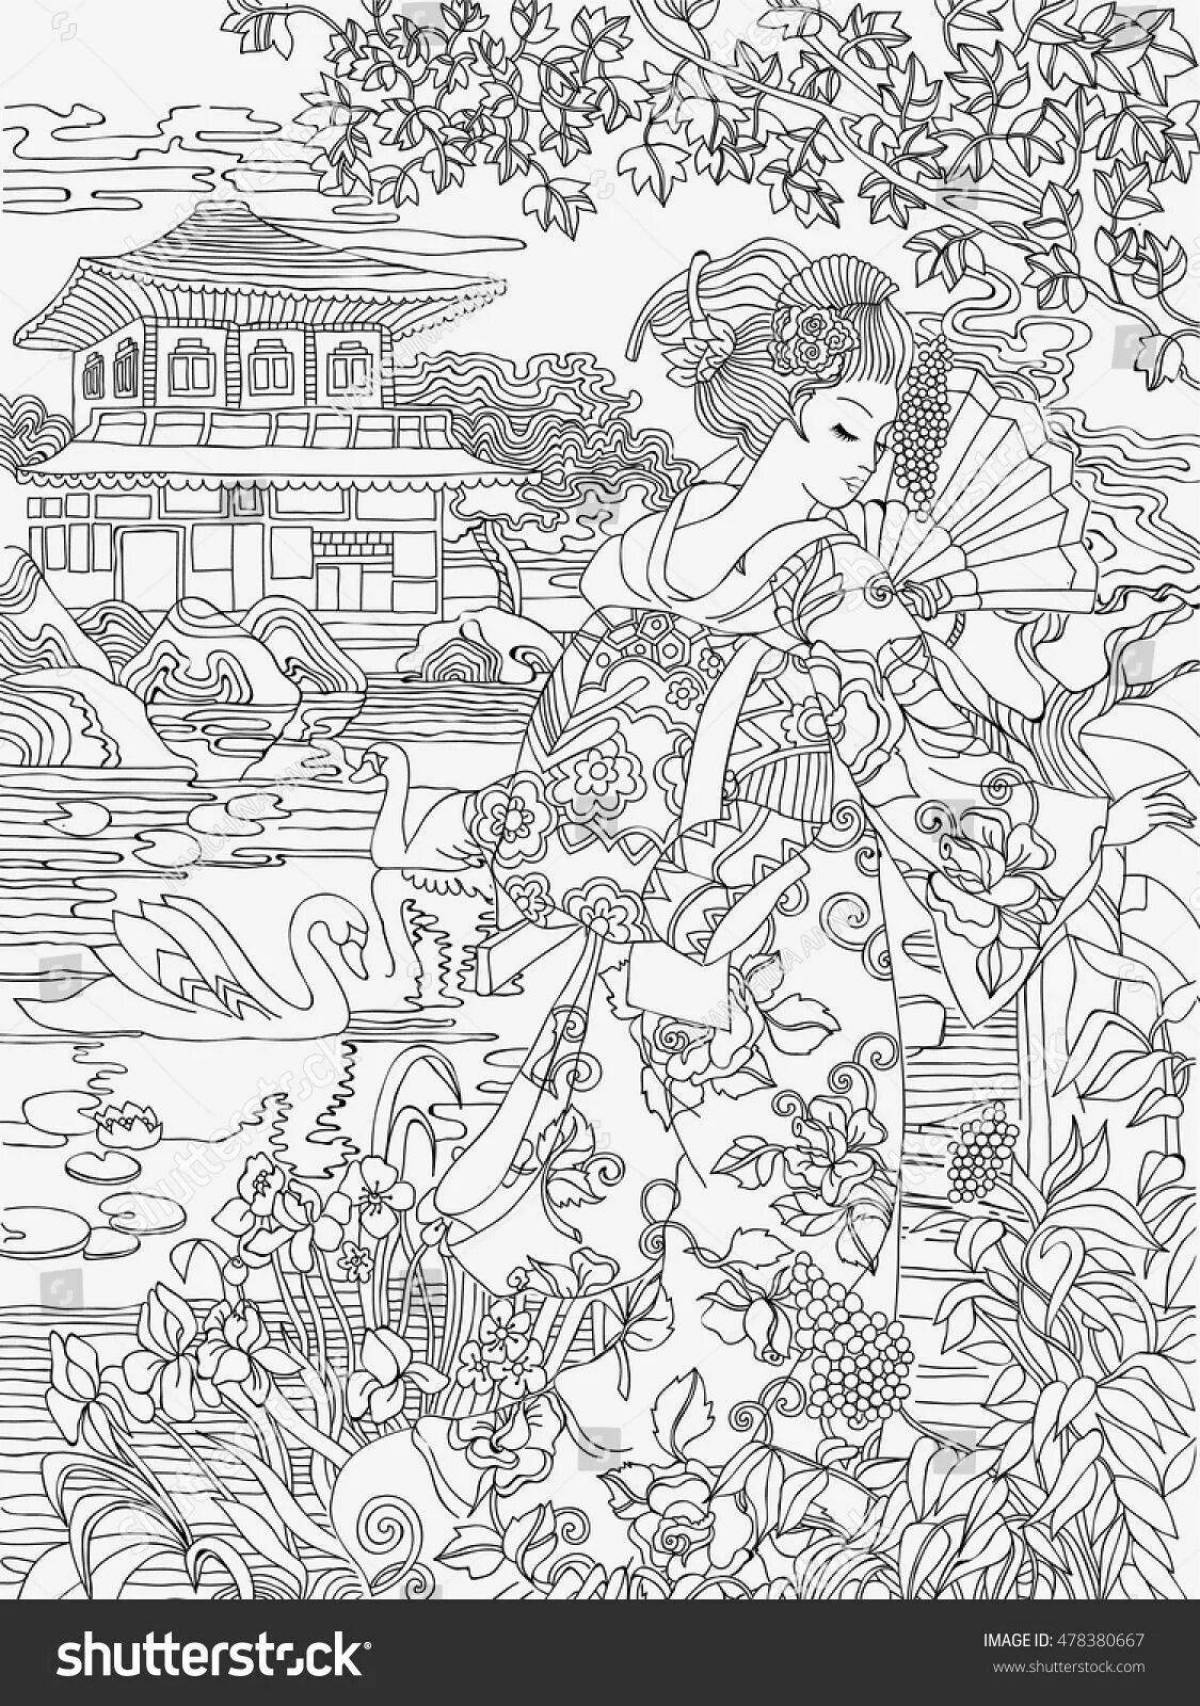 Japanese playful coloring book